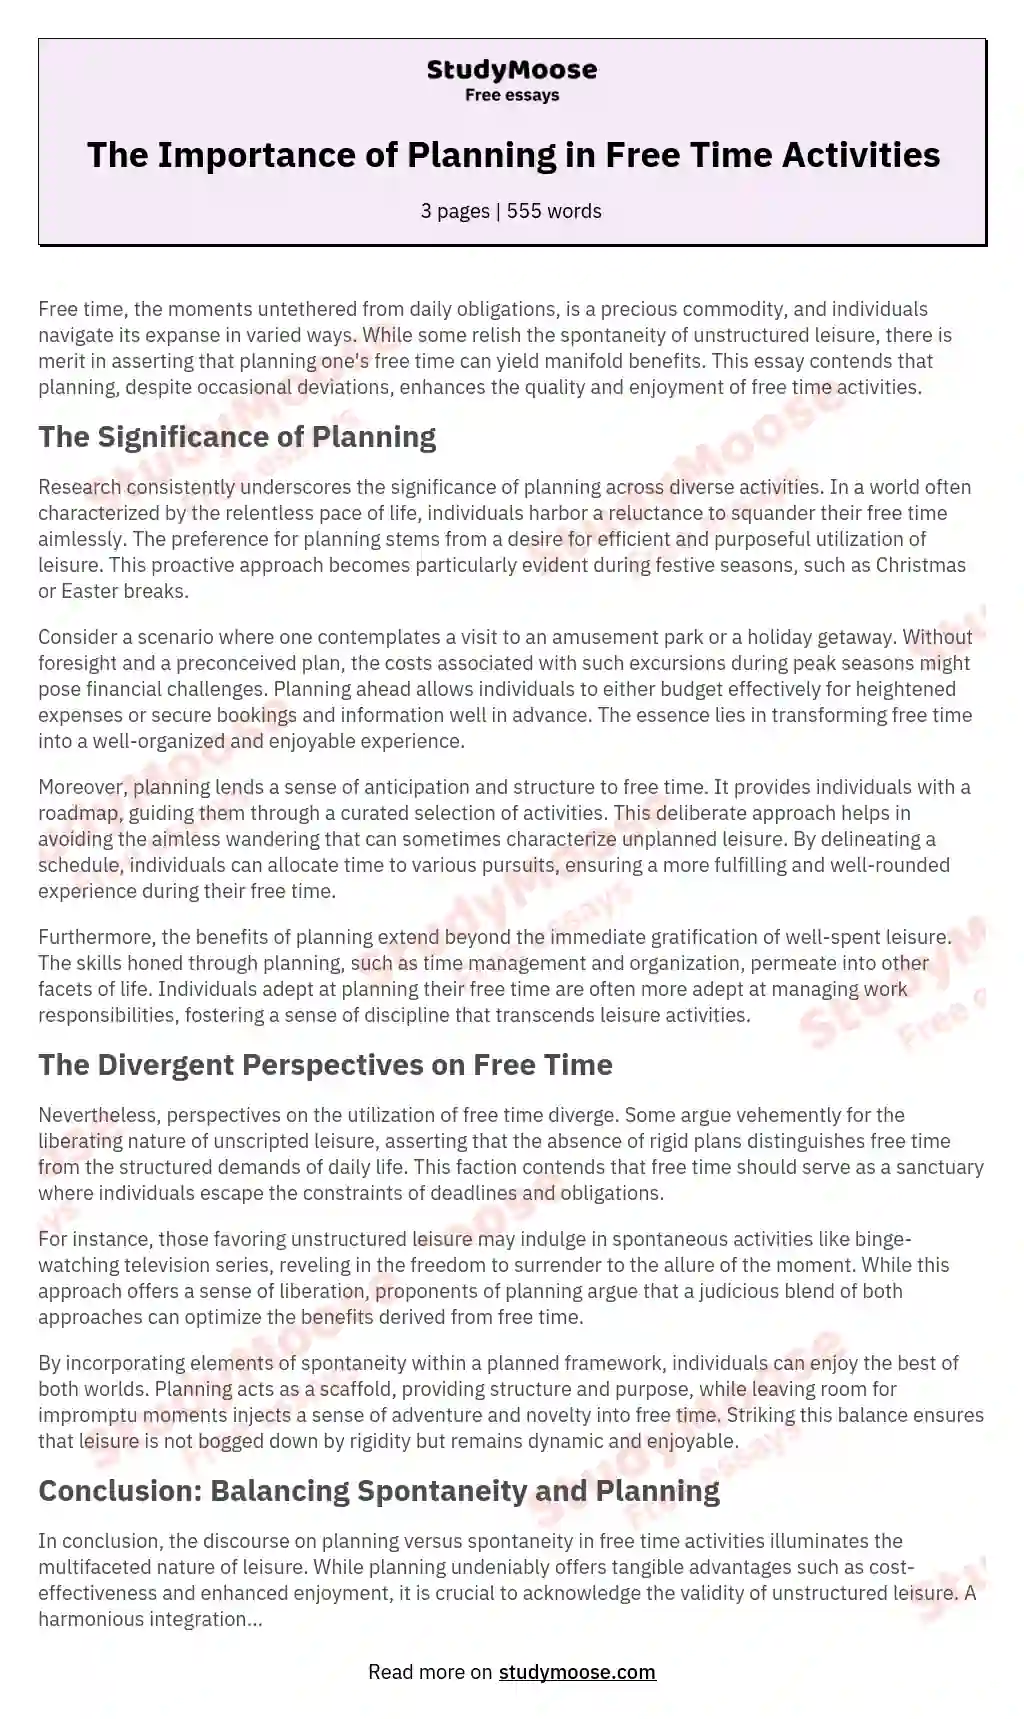 The Importance of Planning in Free Time Activities essay